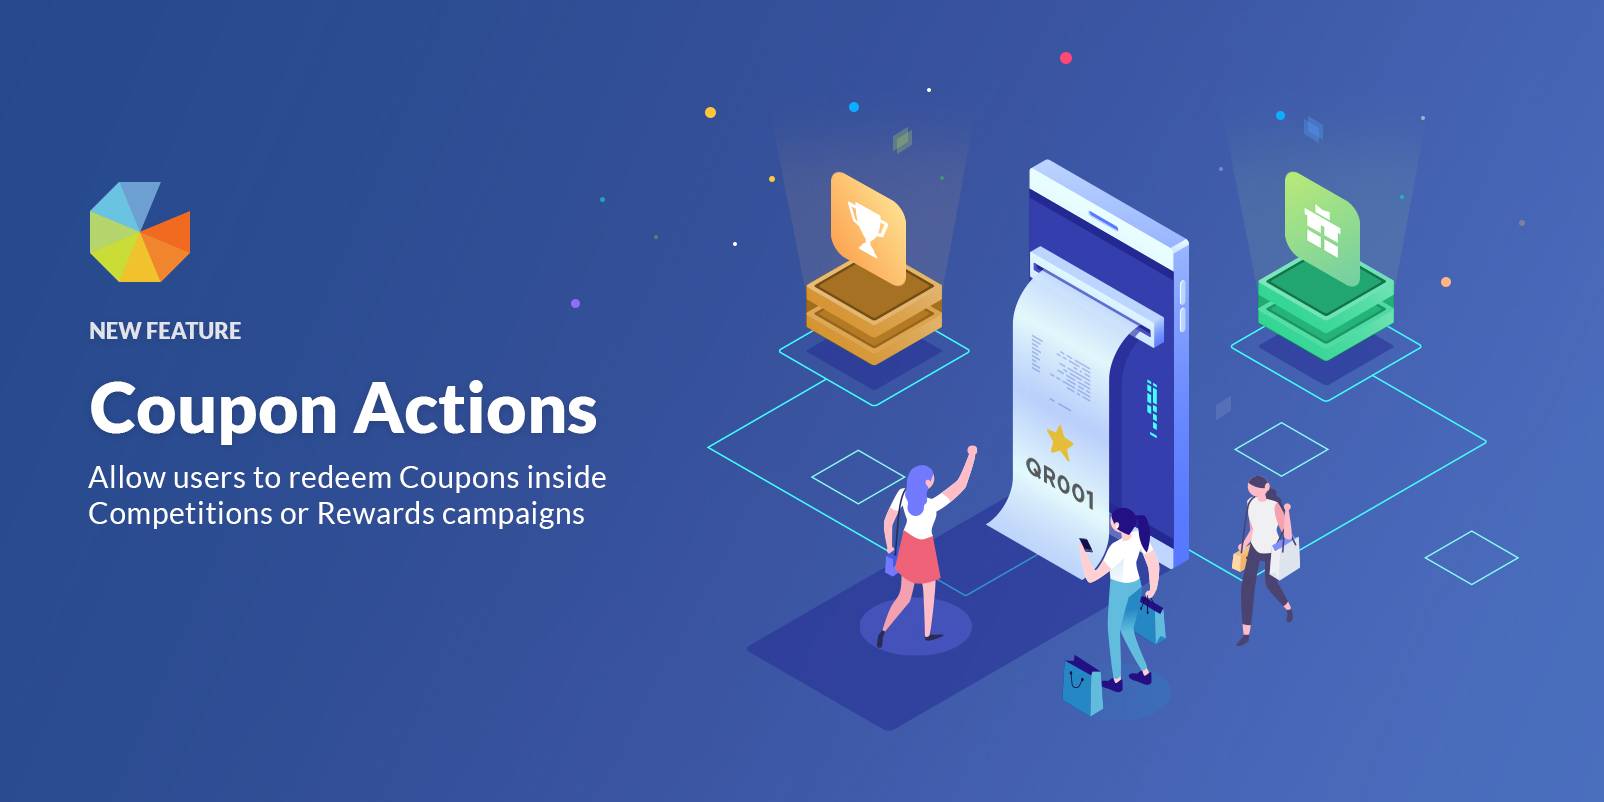 New Feature: Coupon Action for Gleam.io